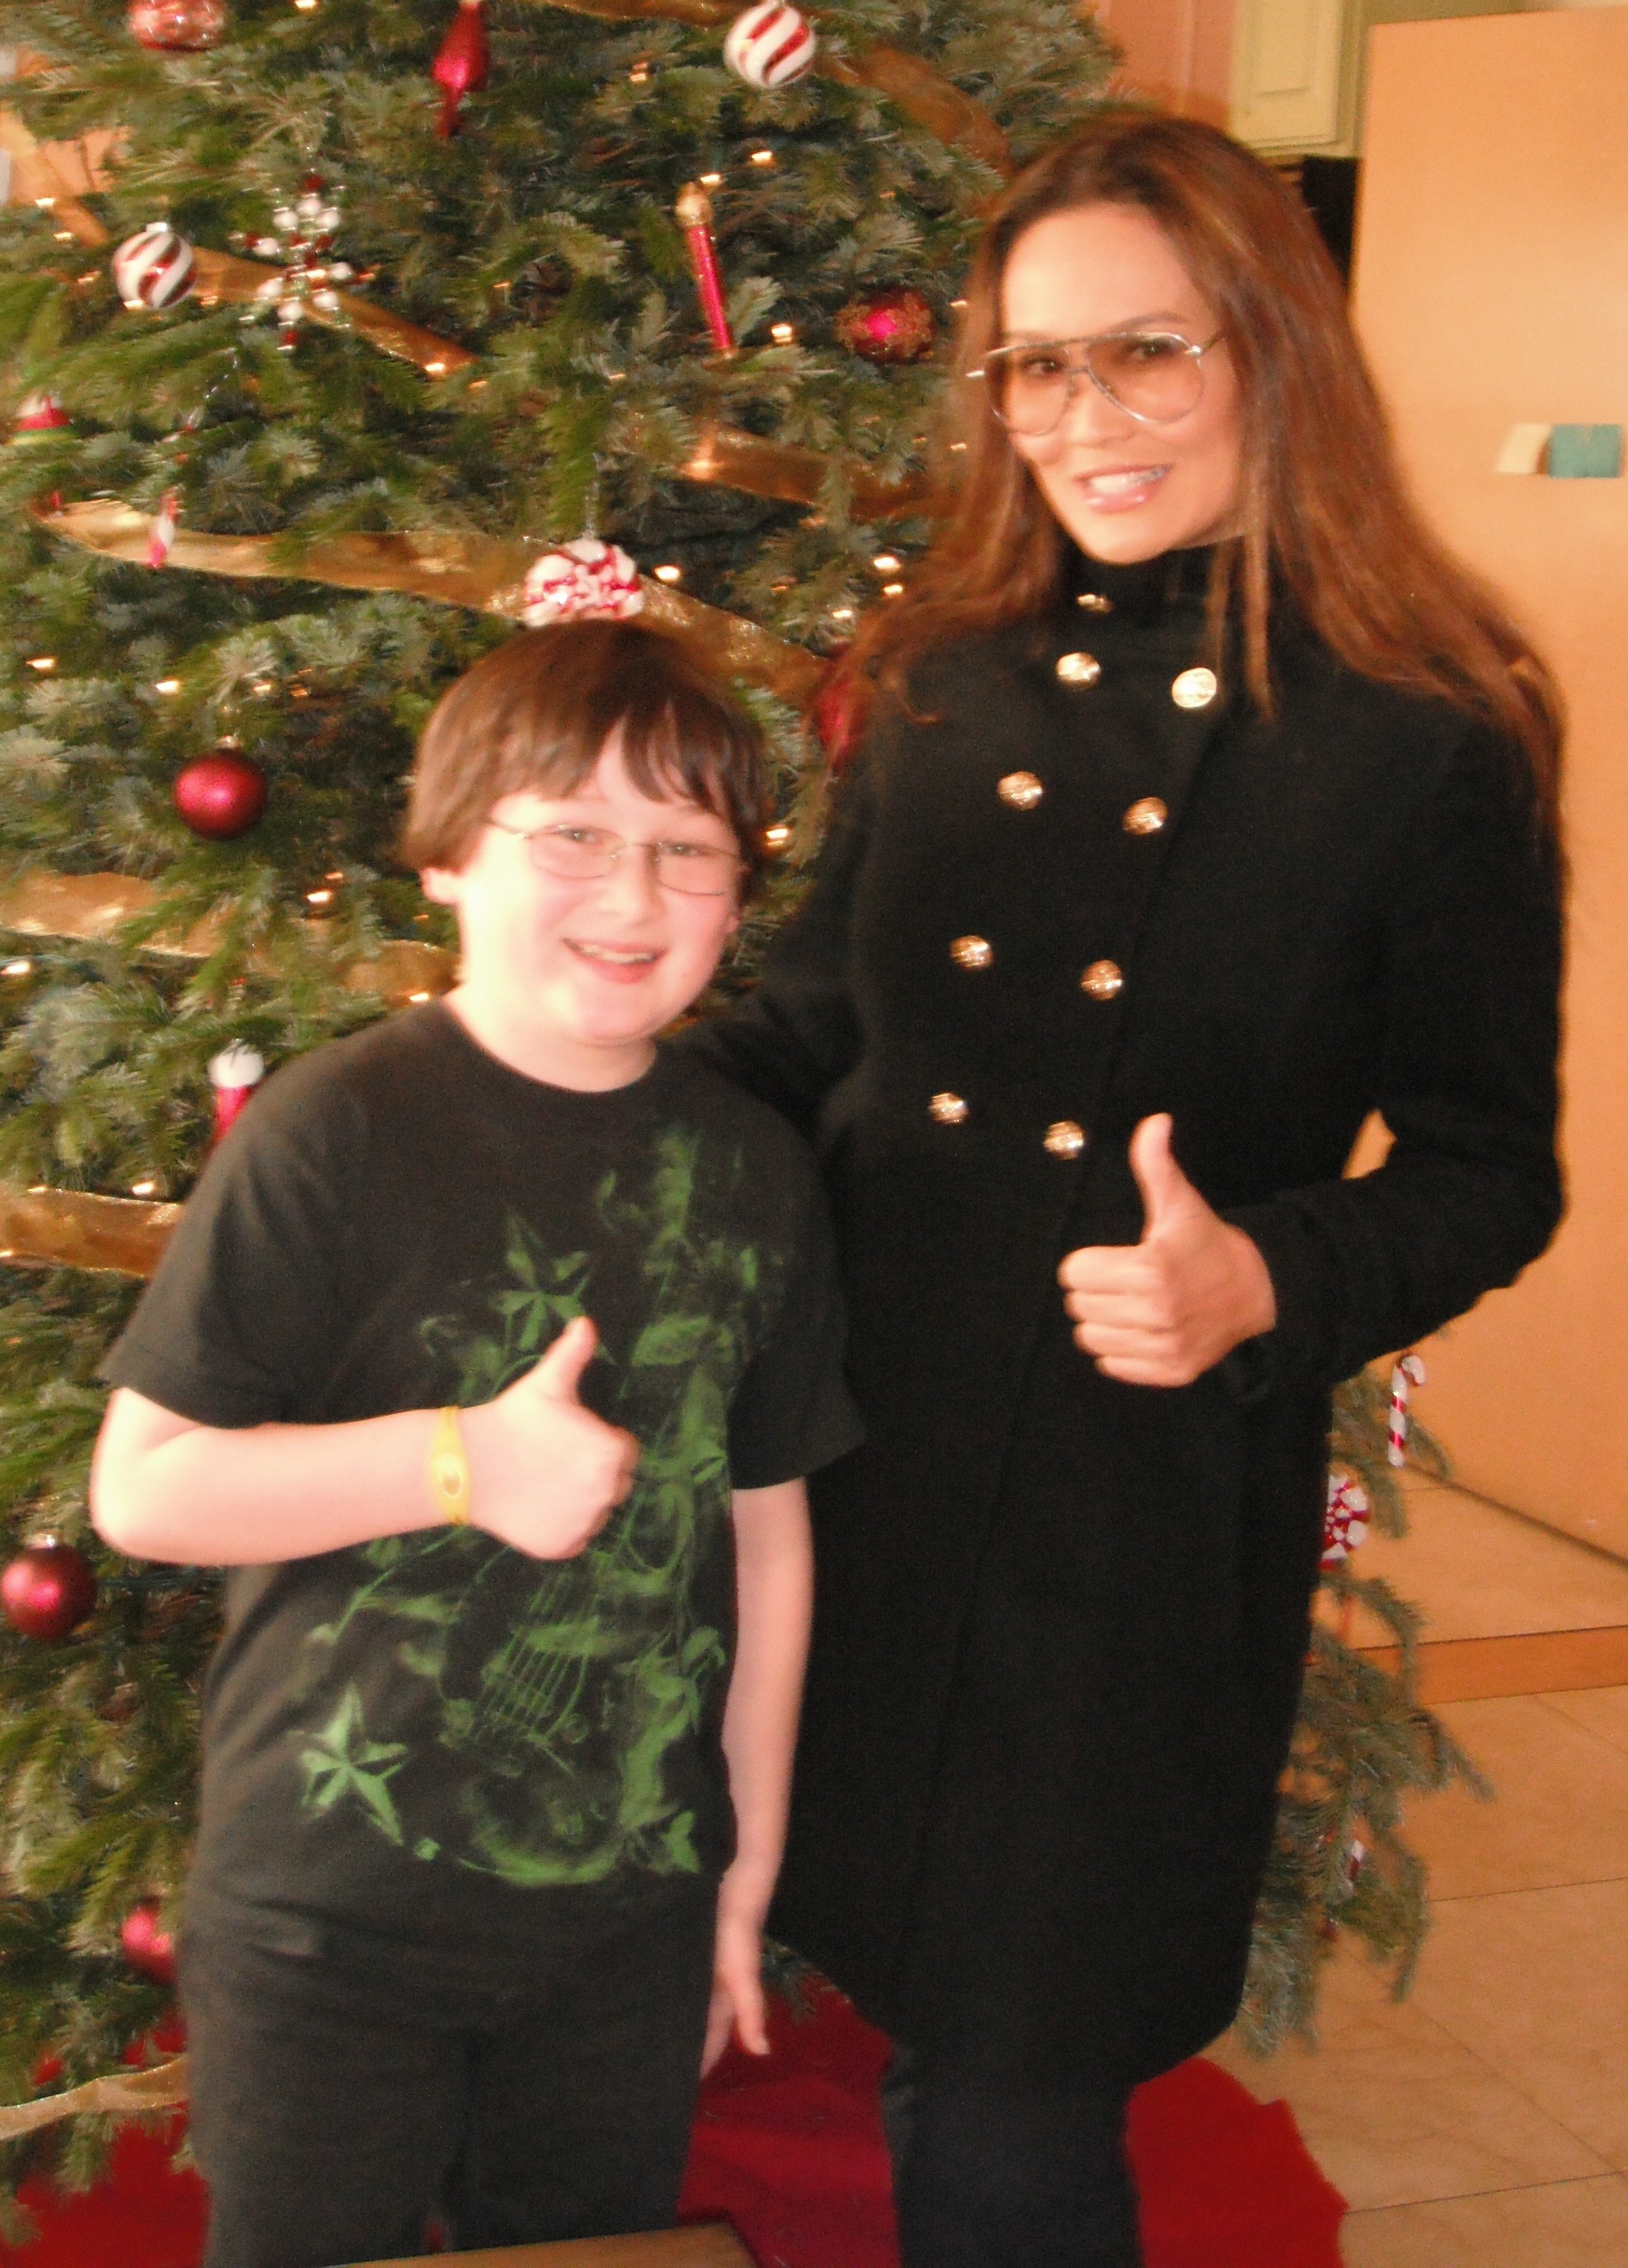 Matthew Jacob Wayne and Tia Carrere at Salami Studios, in Studio City, CA, after finishing up their voice over sessions, just before Christmas, 2011.